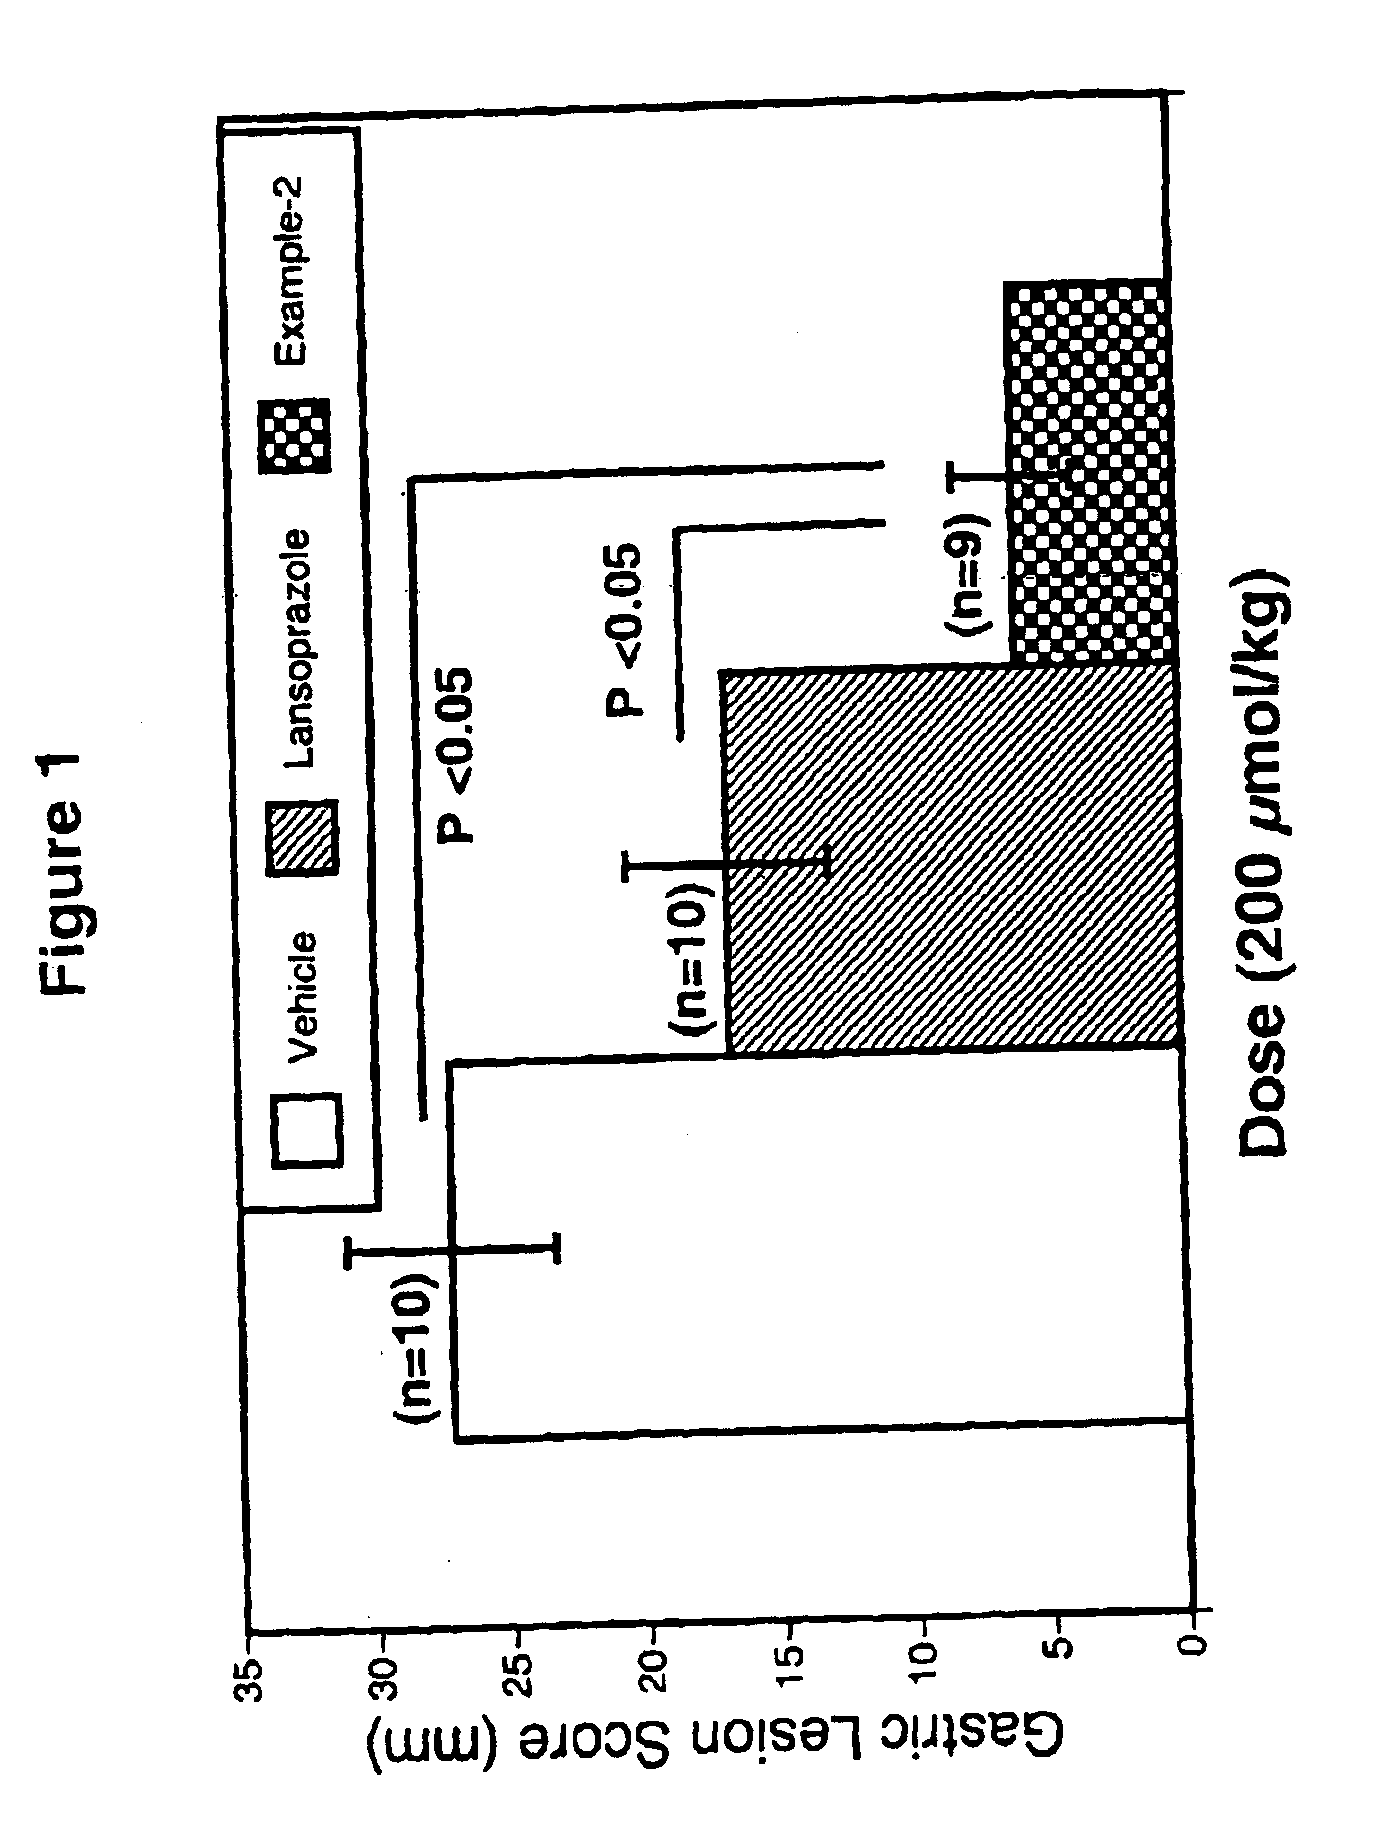 Methods using proton pump inhibitors and nitric oxide donors